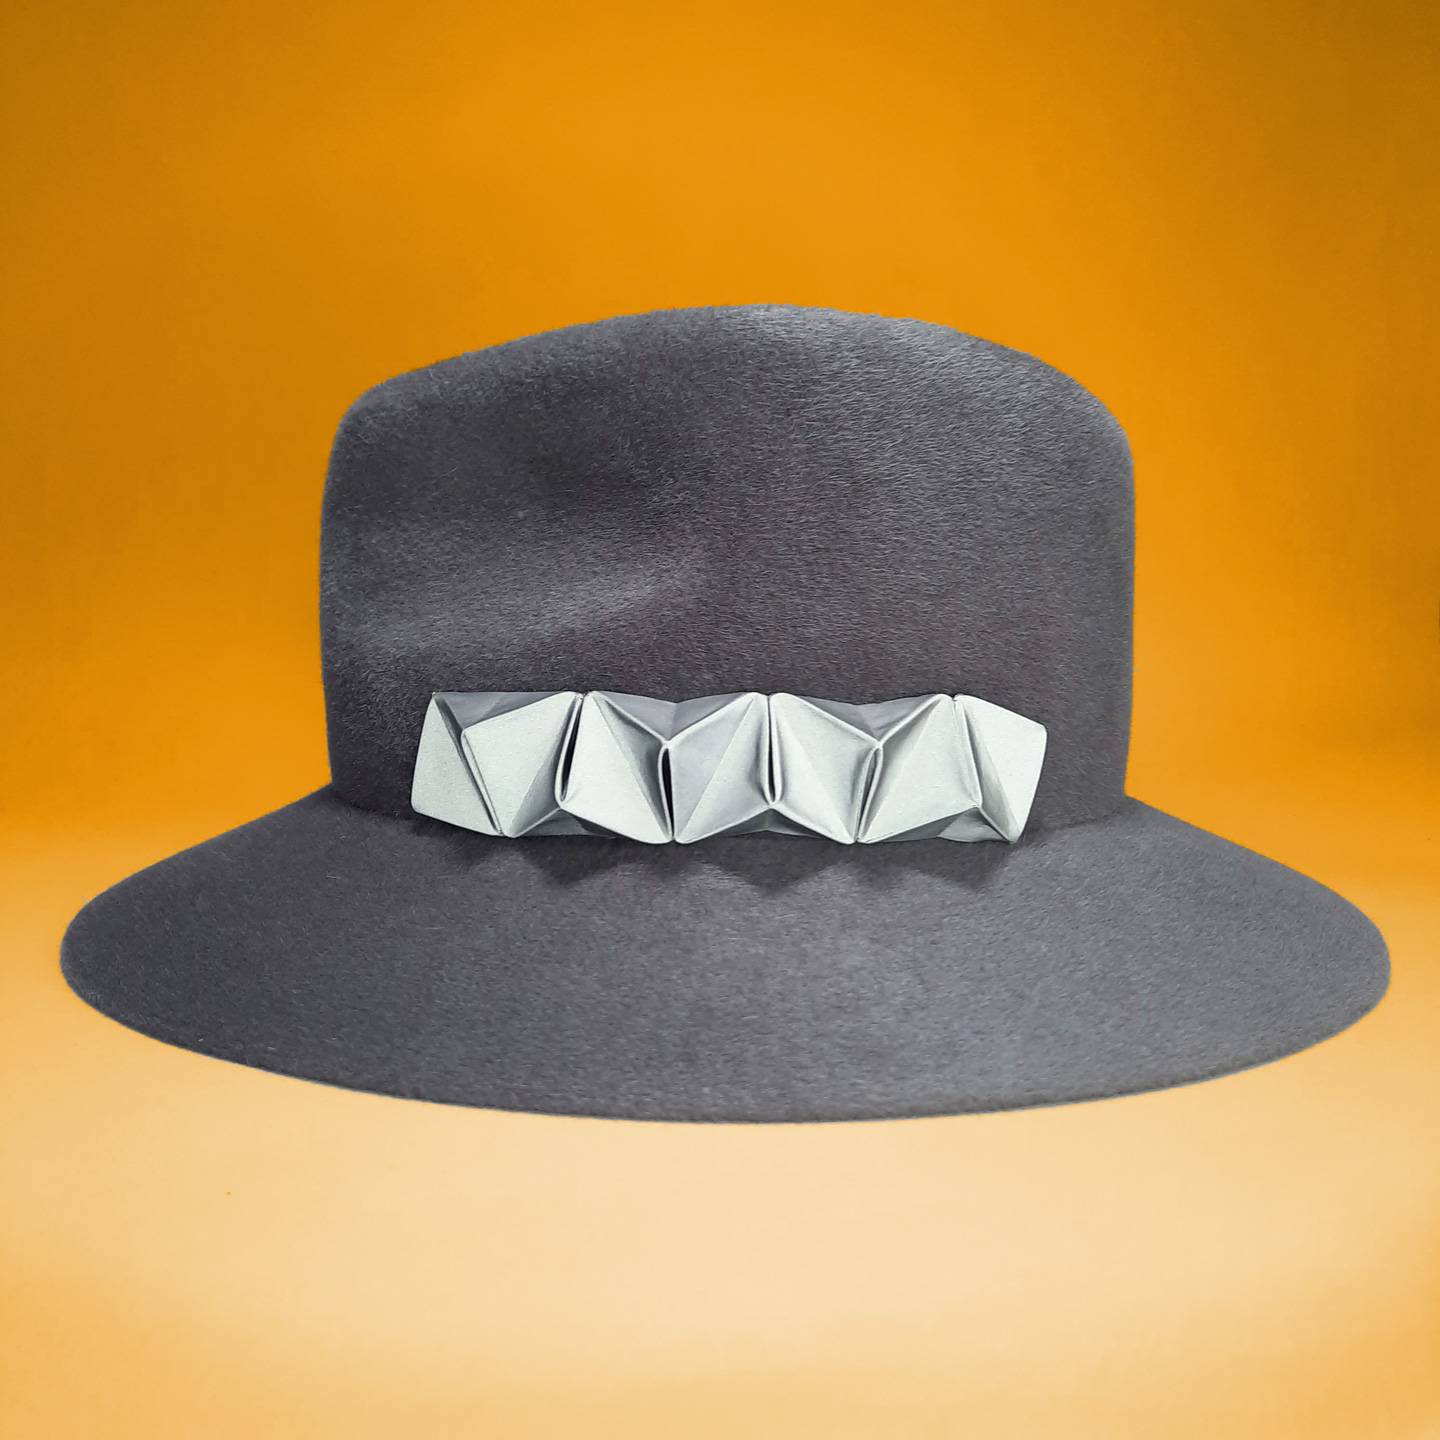 Grey velour felt fedora with a reflective chameleon detail that can be easily changed to customize your hat in a few seconds.